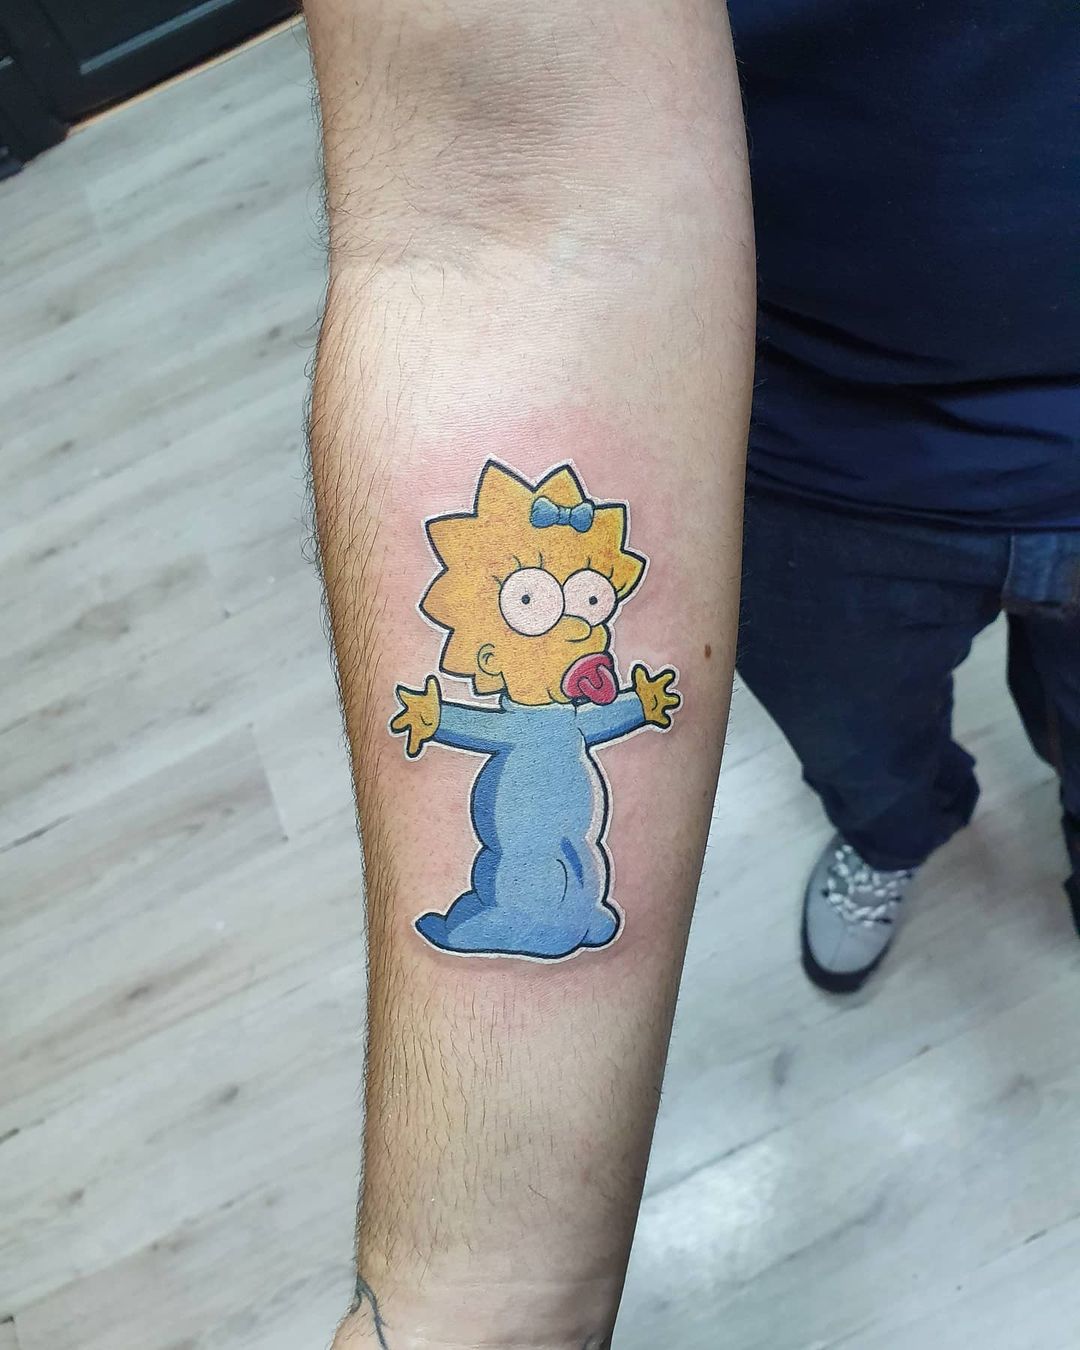 25 funny simpsons tattoos as wacky and wild as the show itself